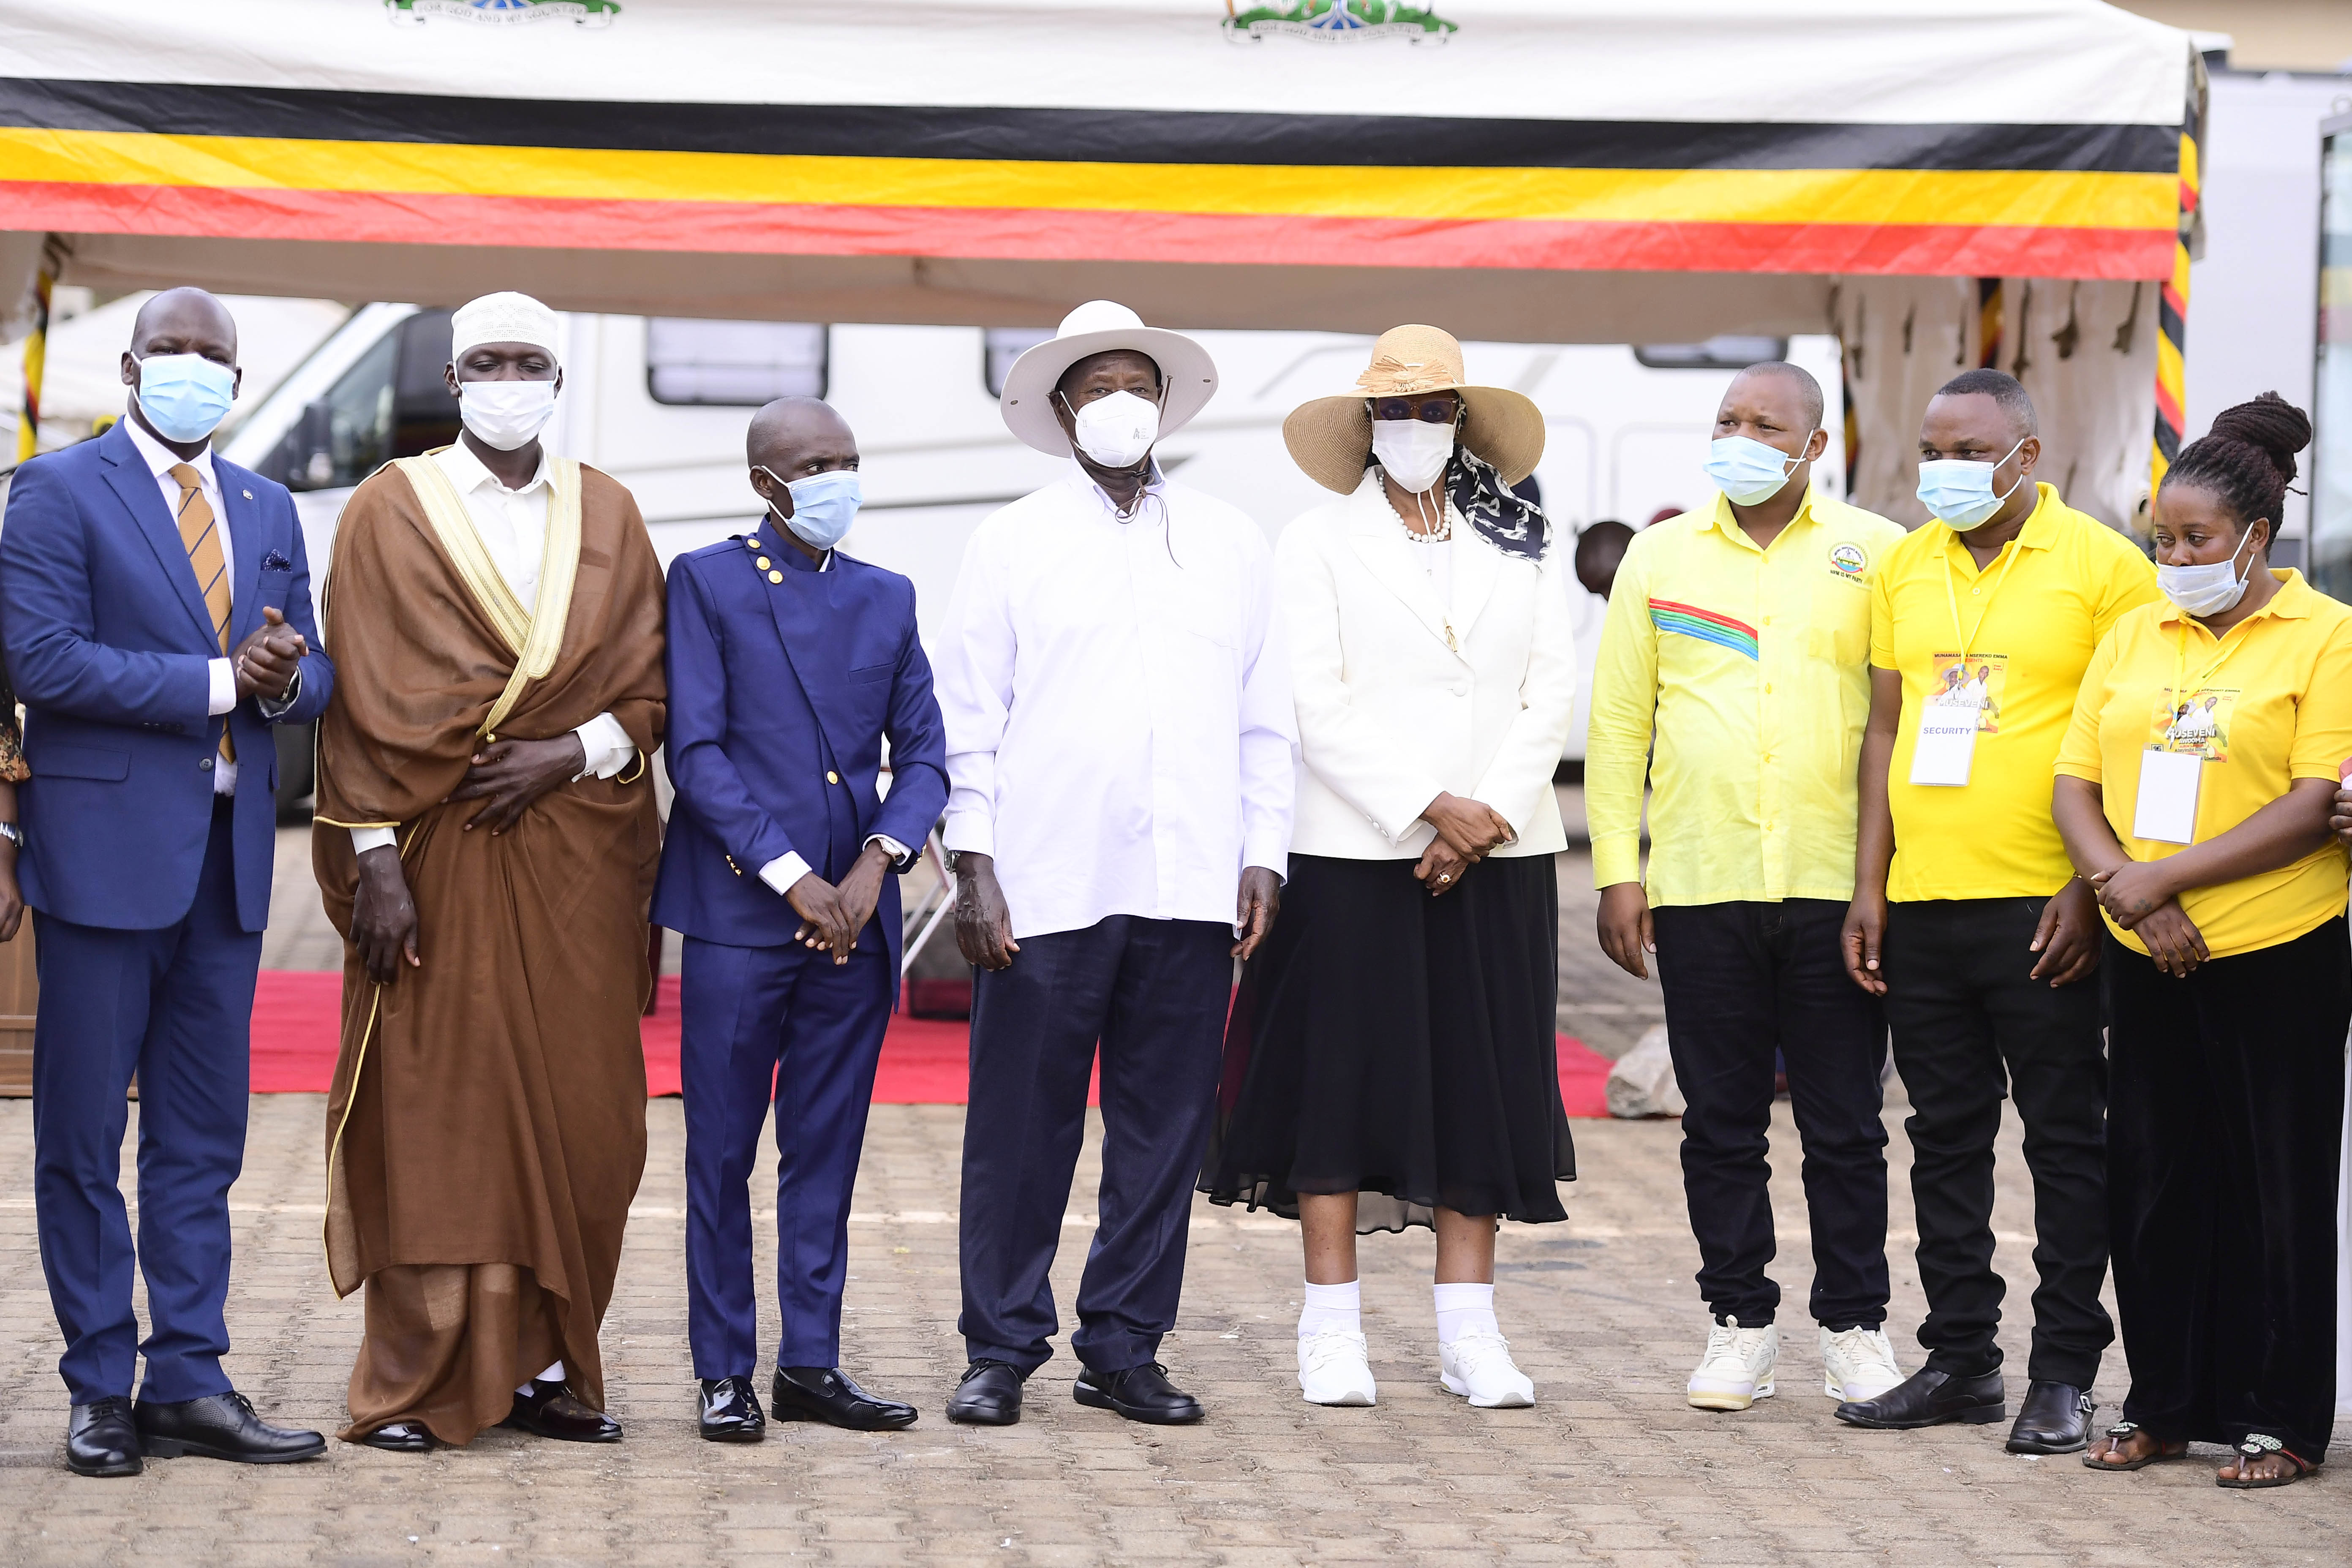 Museveni Awooma album launched in the presence of Janet